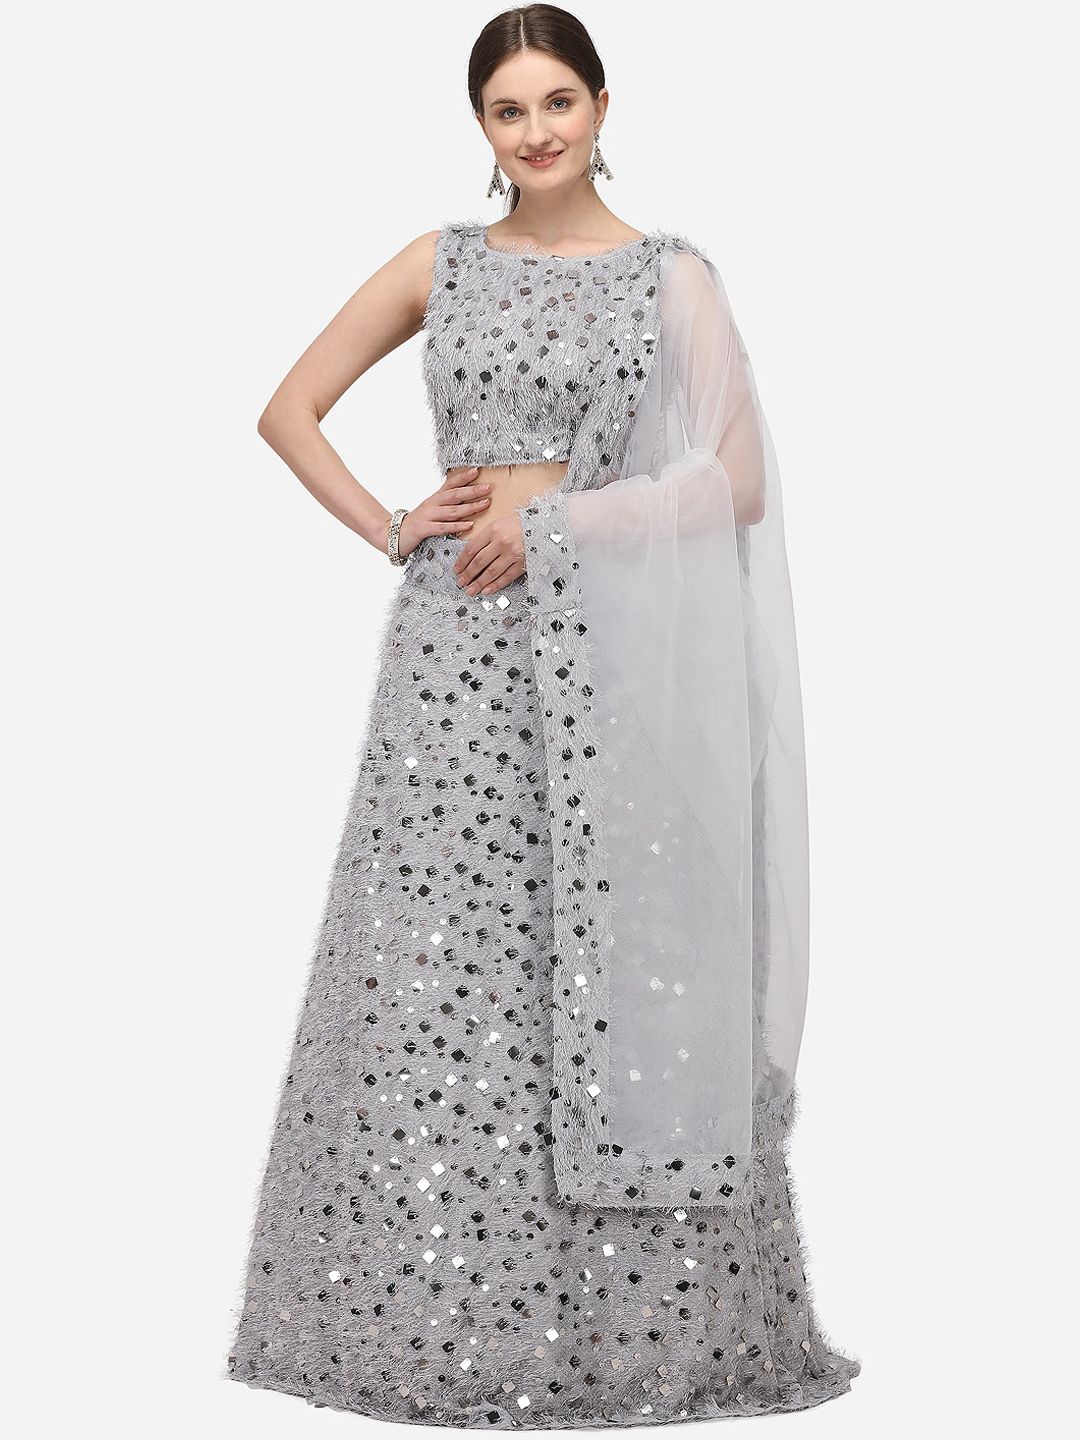 JATRIQQ Grey & Silver-Toned Embellished Semi-Stitched Lehenga & Unstitched Blouse with Dupatta Price in India